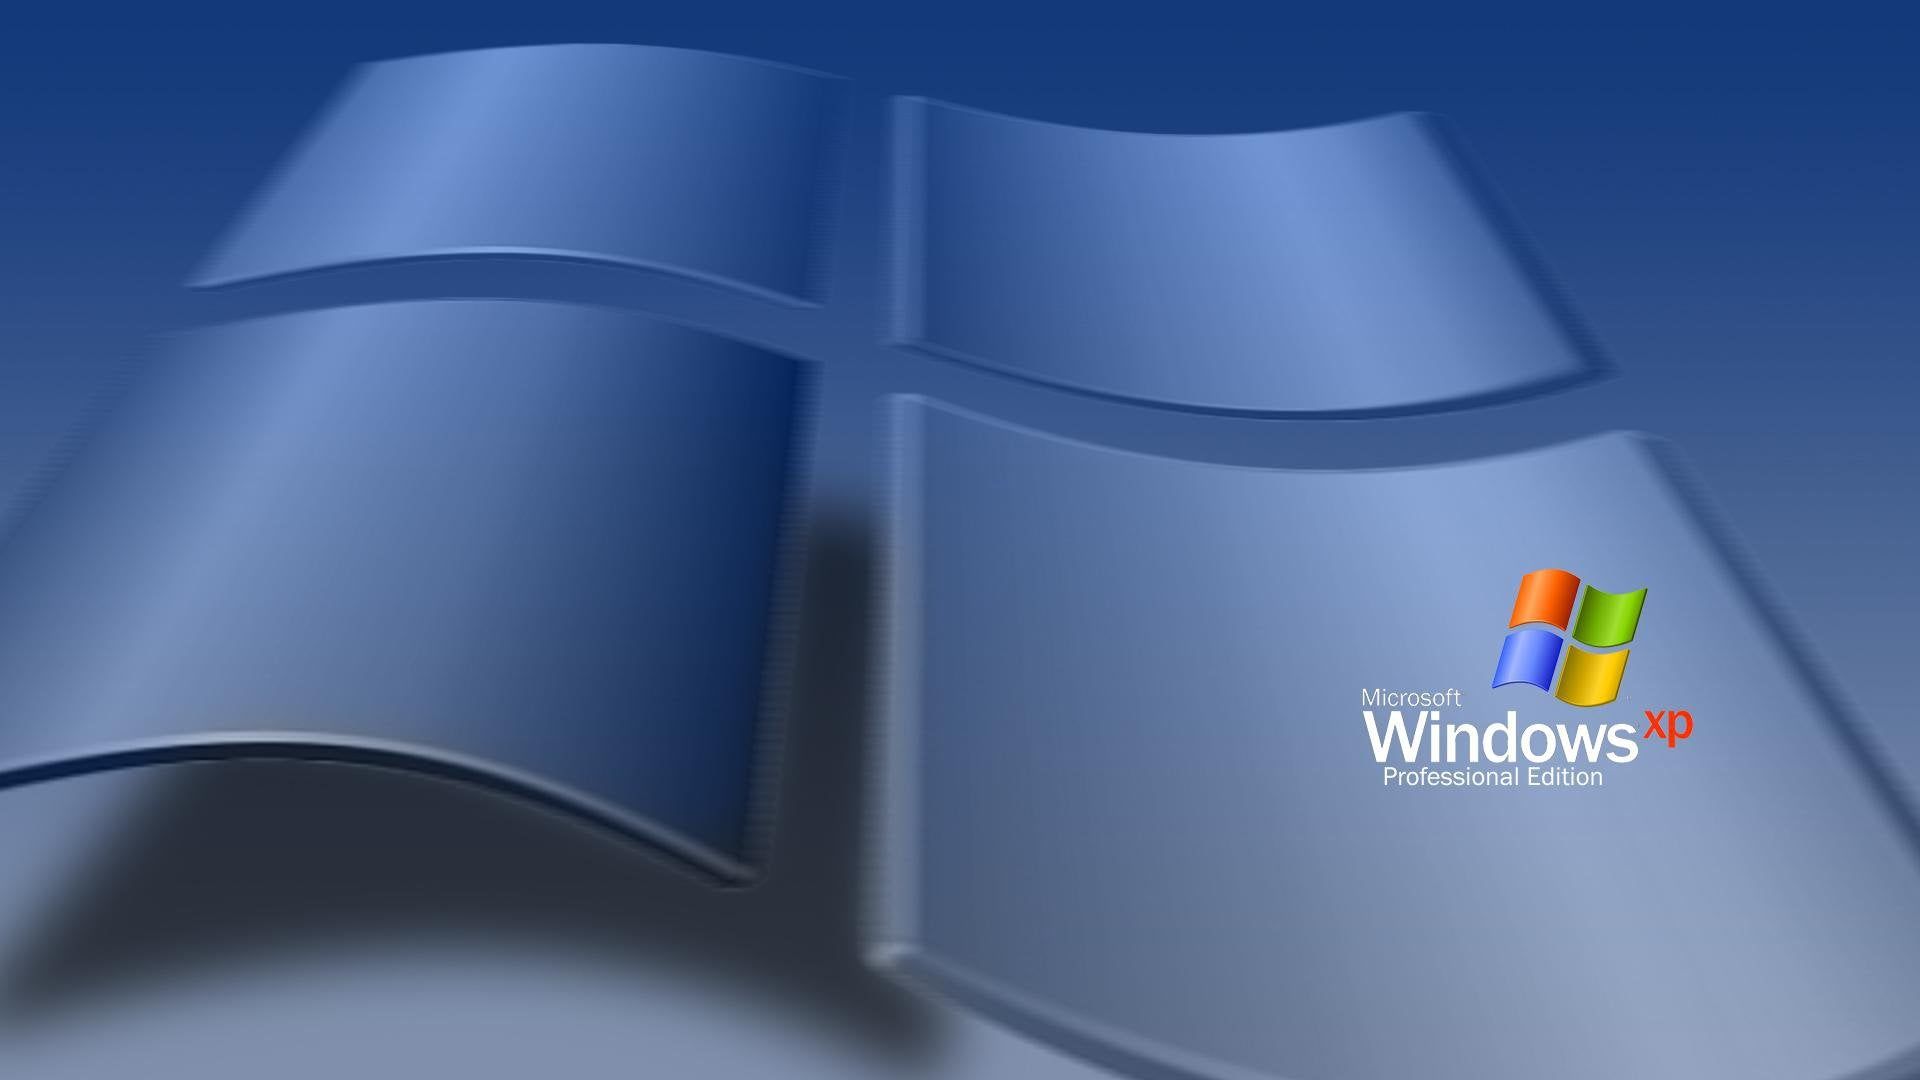 Any early 2000s Windows aesthetic wallpaper?